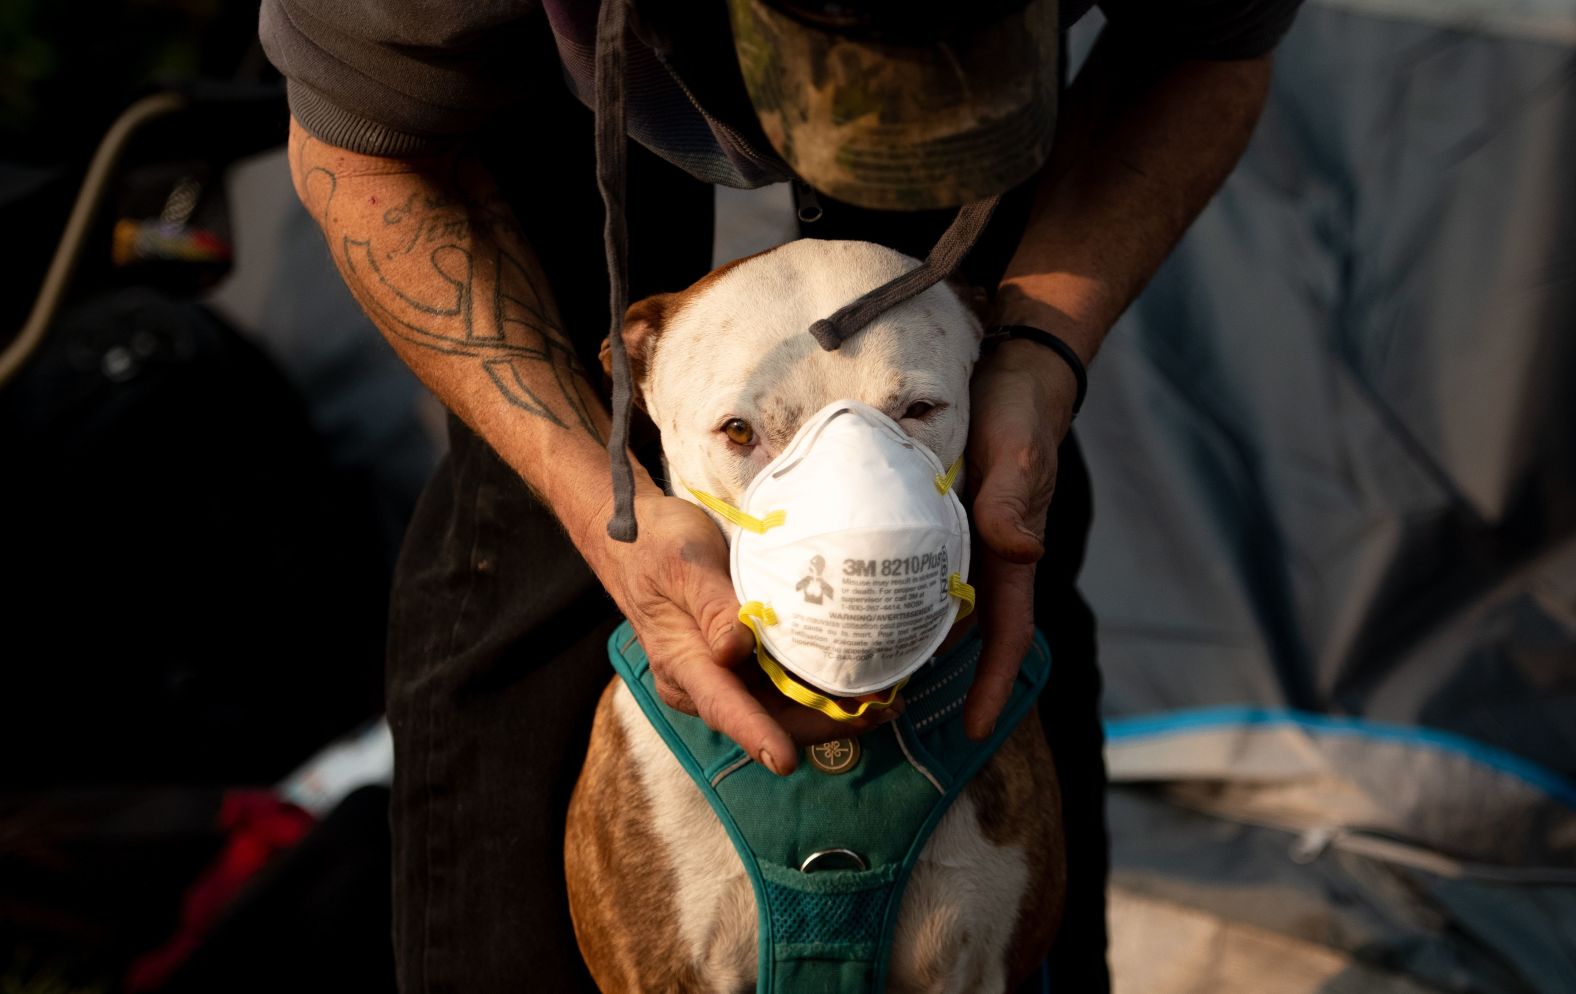 Jason House attempts to put a respirator mask on his dog Rowland on November 17.